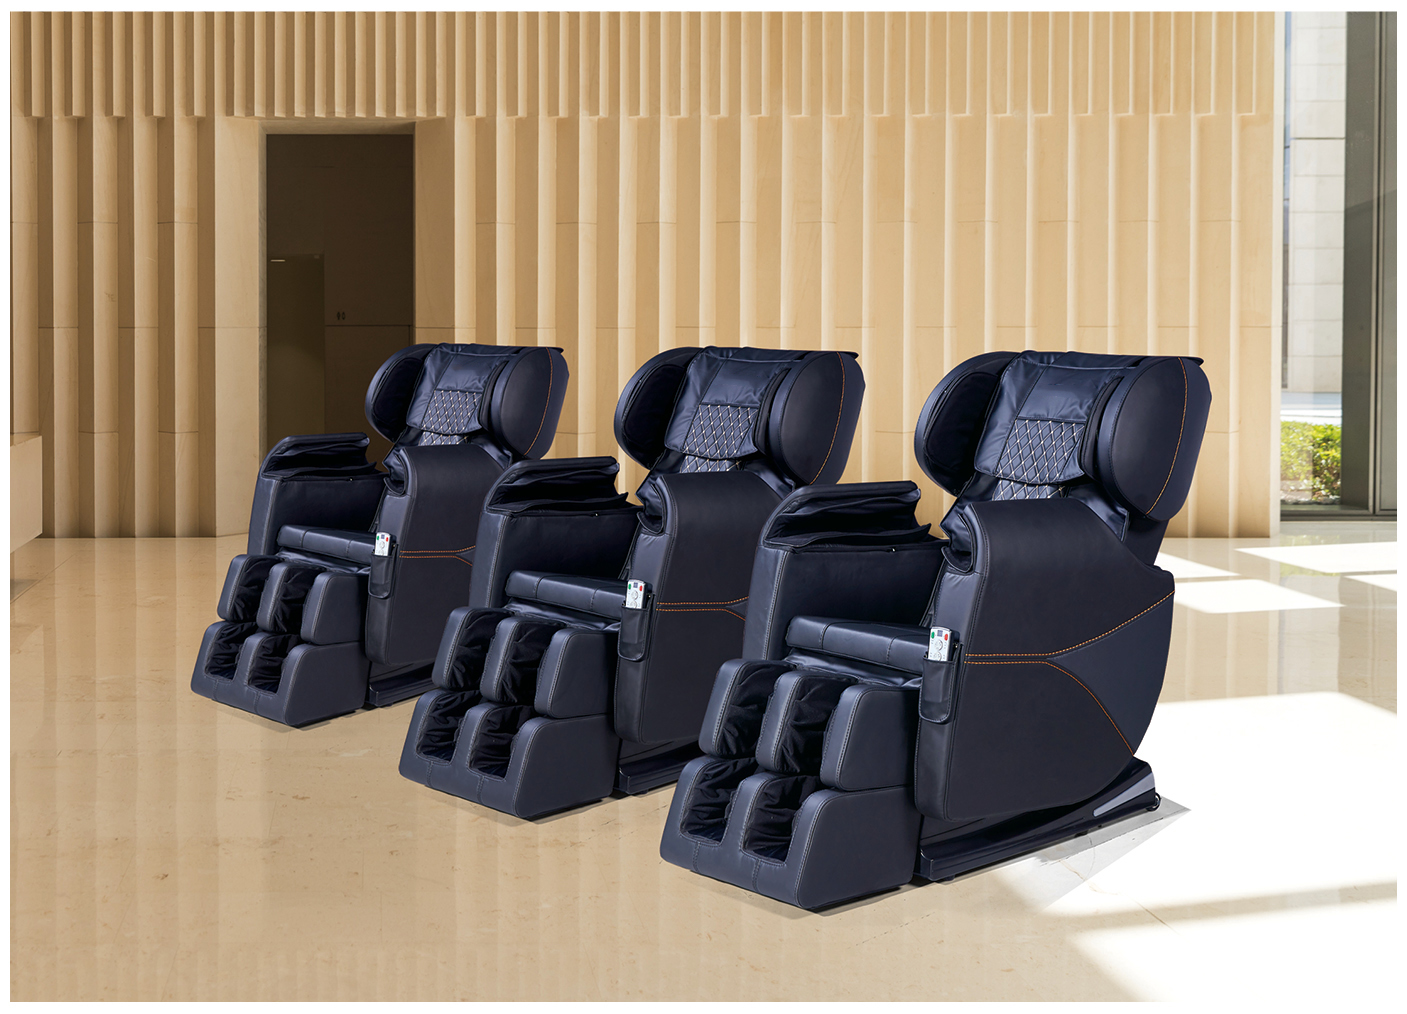 Dining Room Furniture Modern Dining Room Sets AM 181151 Massage Chair